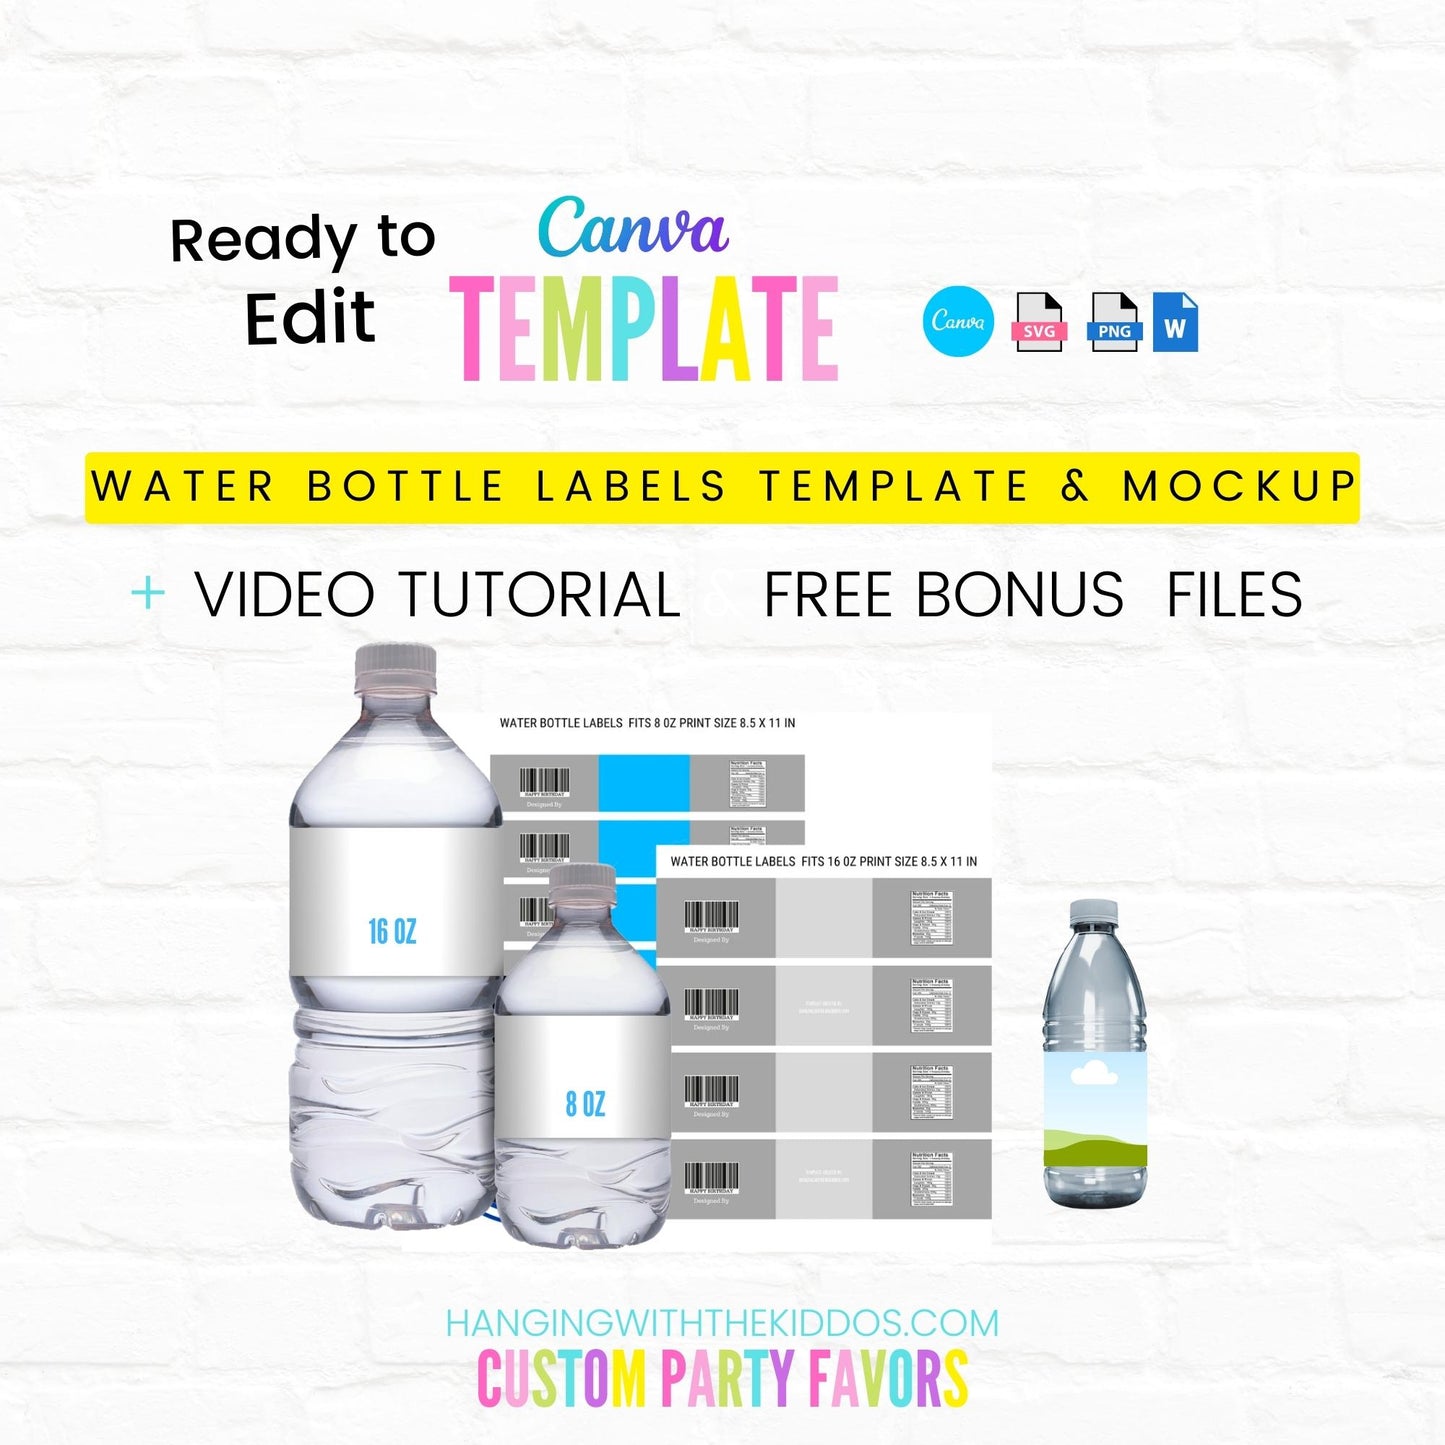 Water Bottle Label Template| Blank Water Bottle Wrappers Template| Canva Editable Template| 16 0Z & 8 OZ